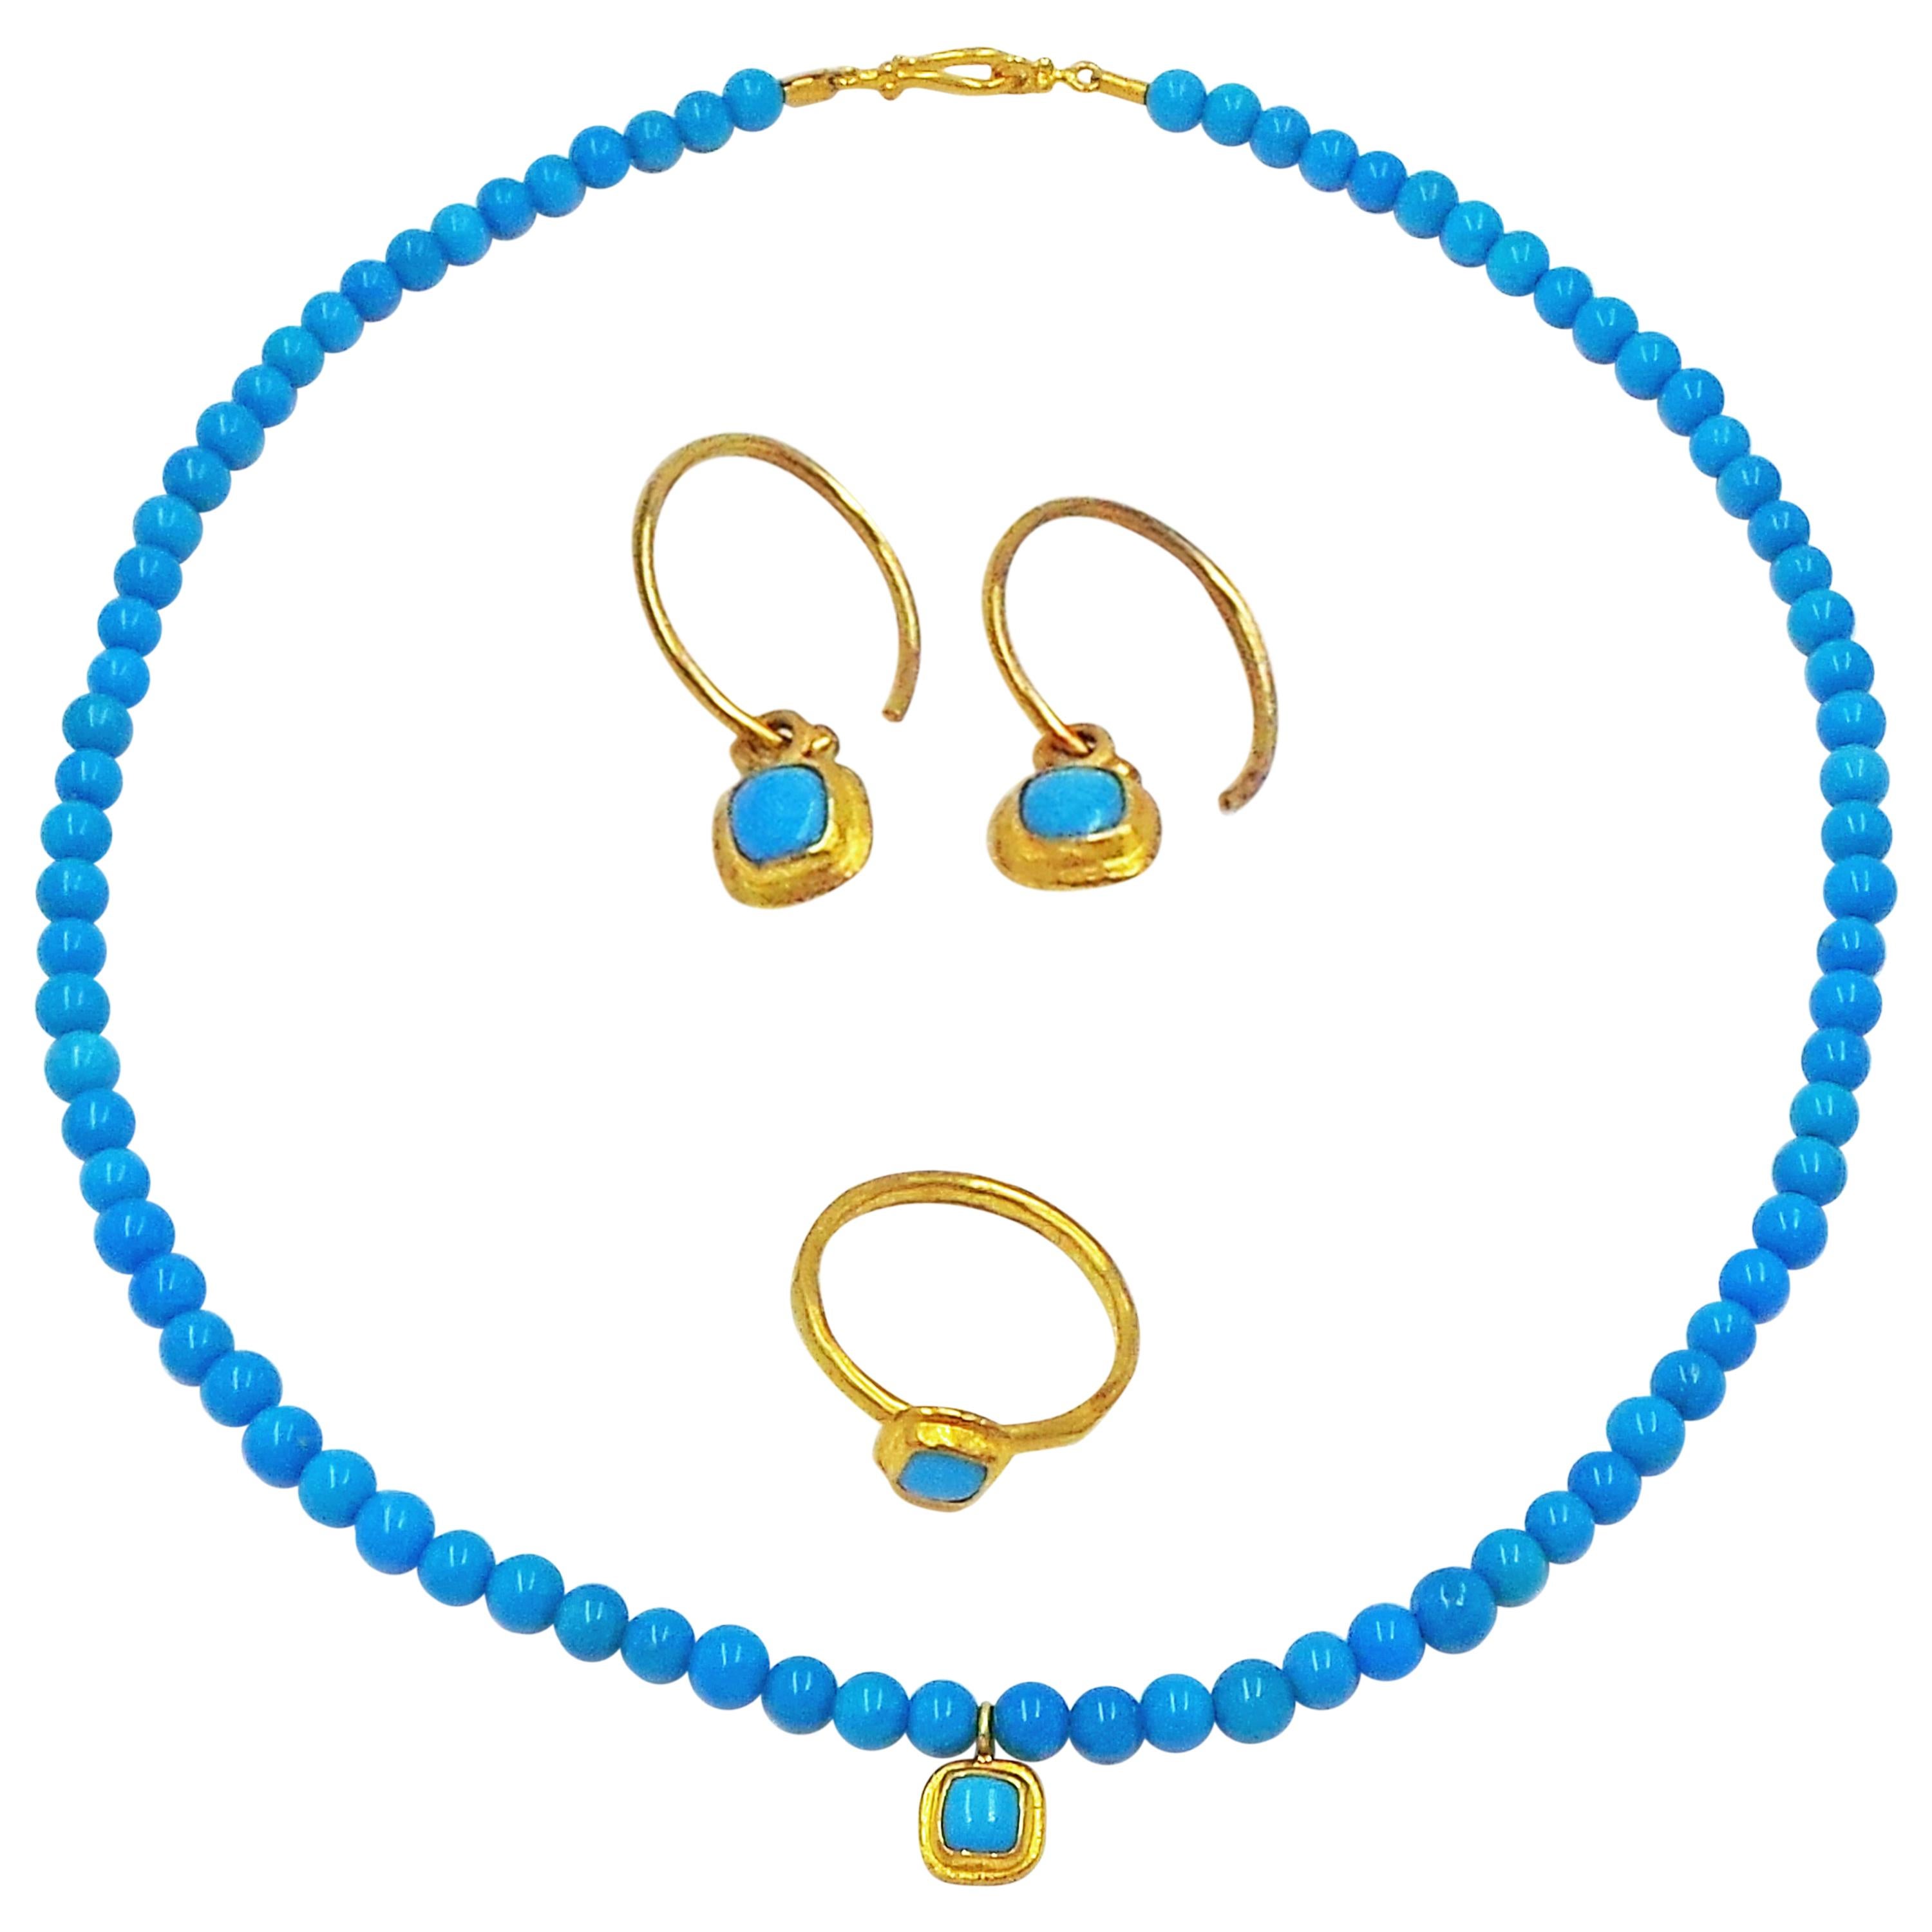 Sleeping Beauty Turquoise and 22 Karat Gold Necklace, Ring and Earrings Set